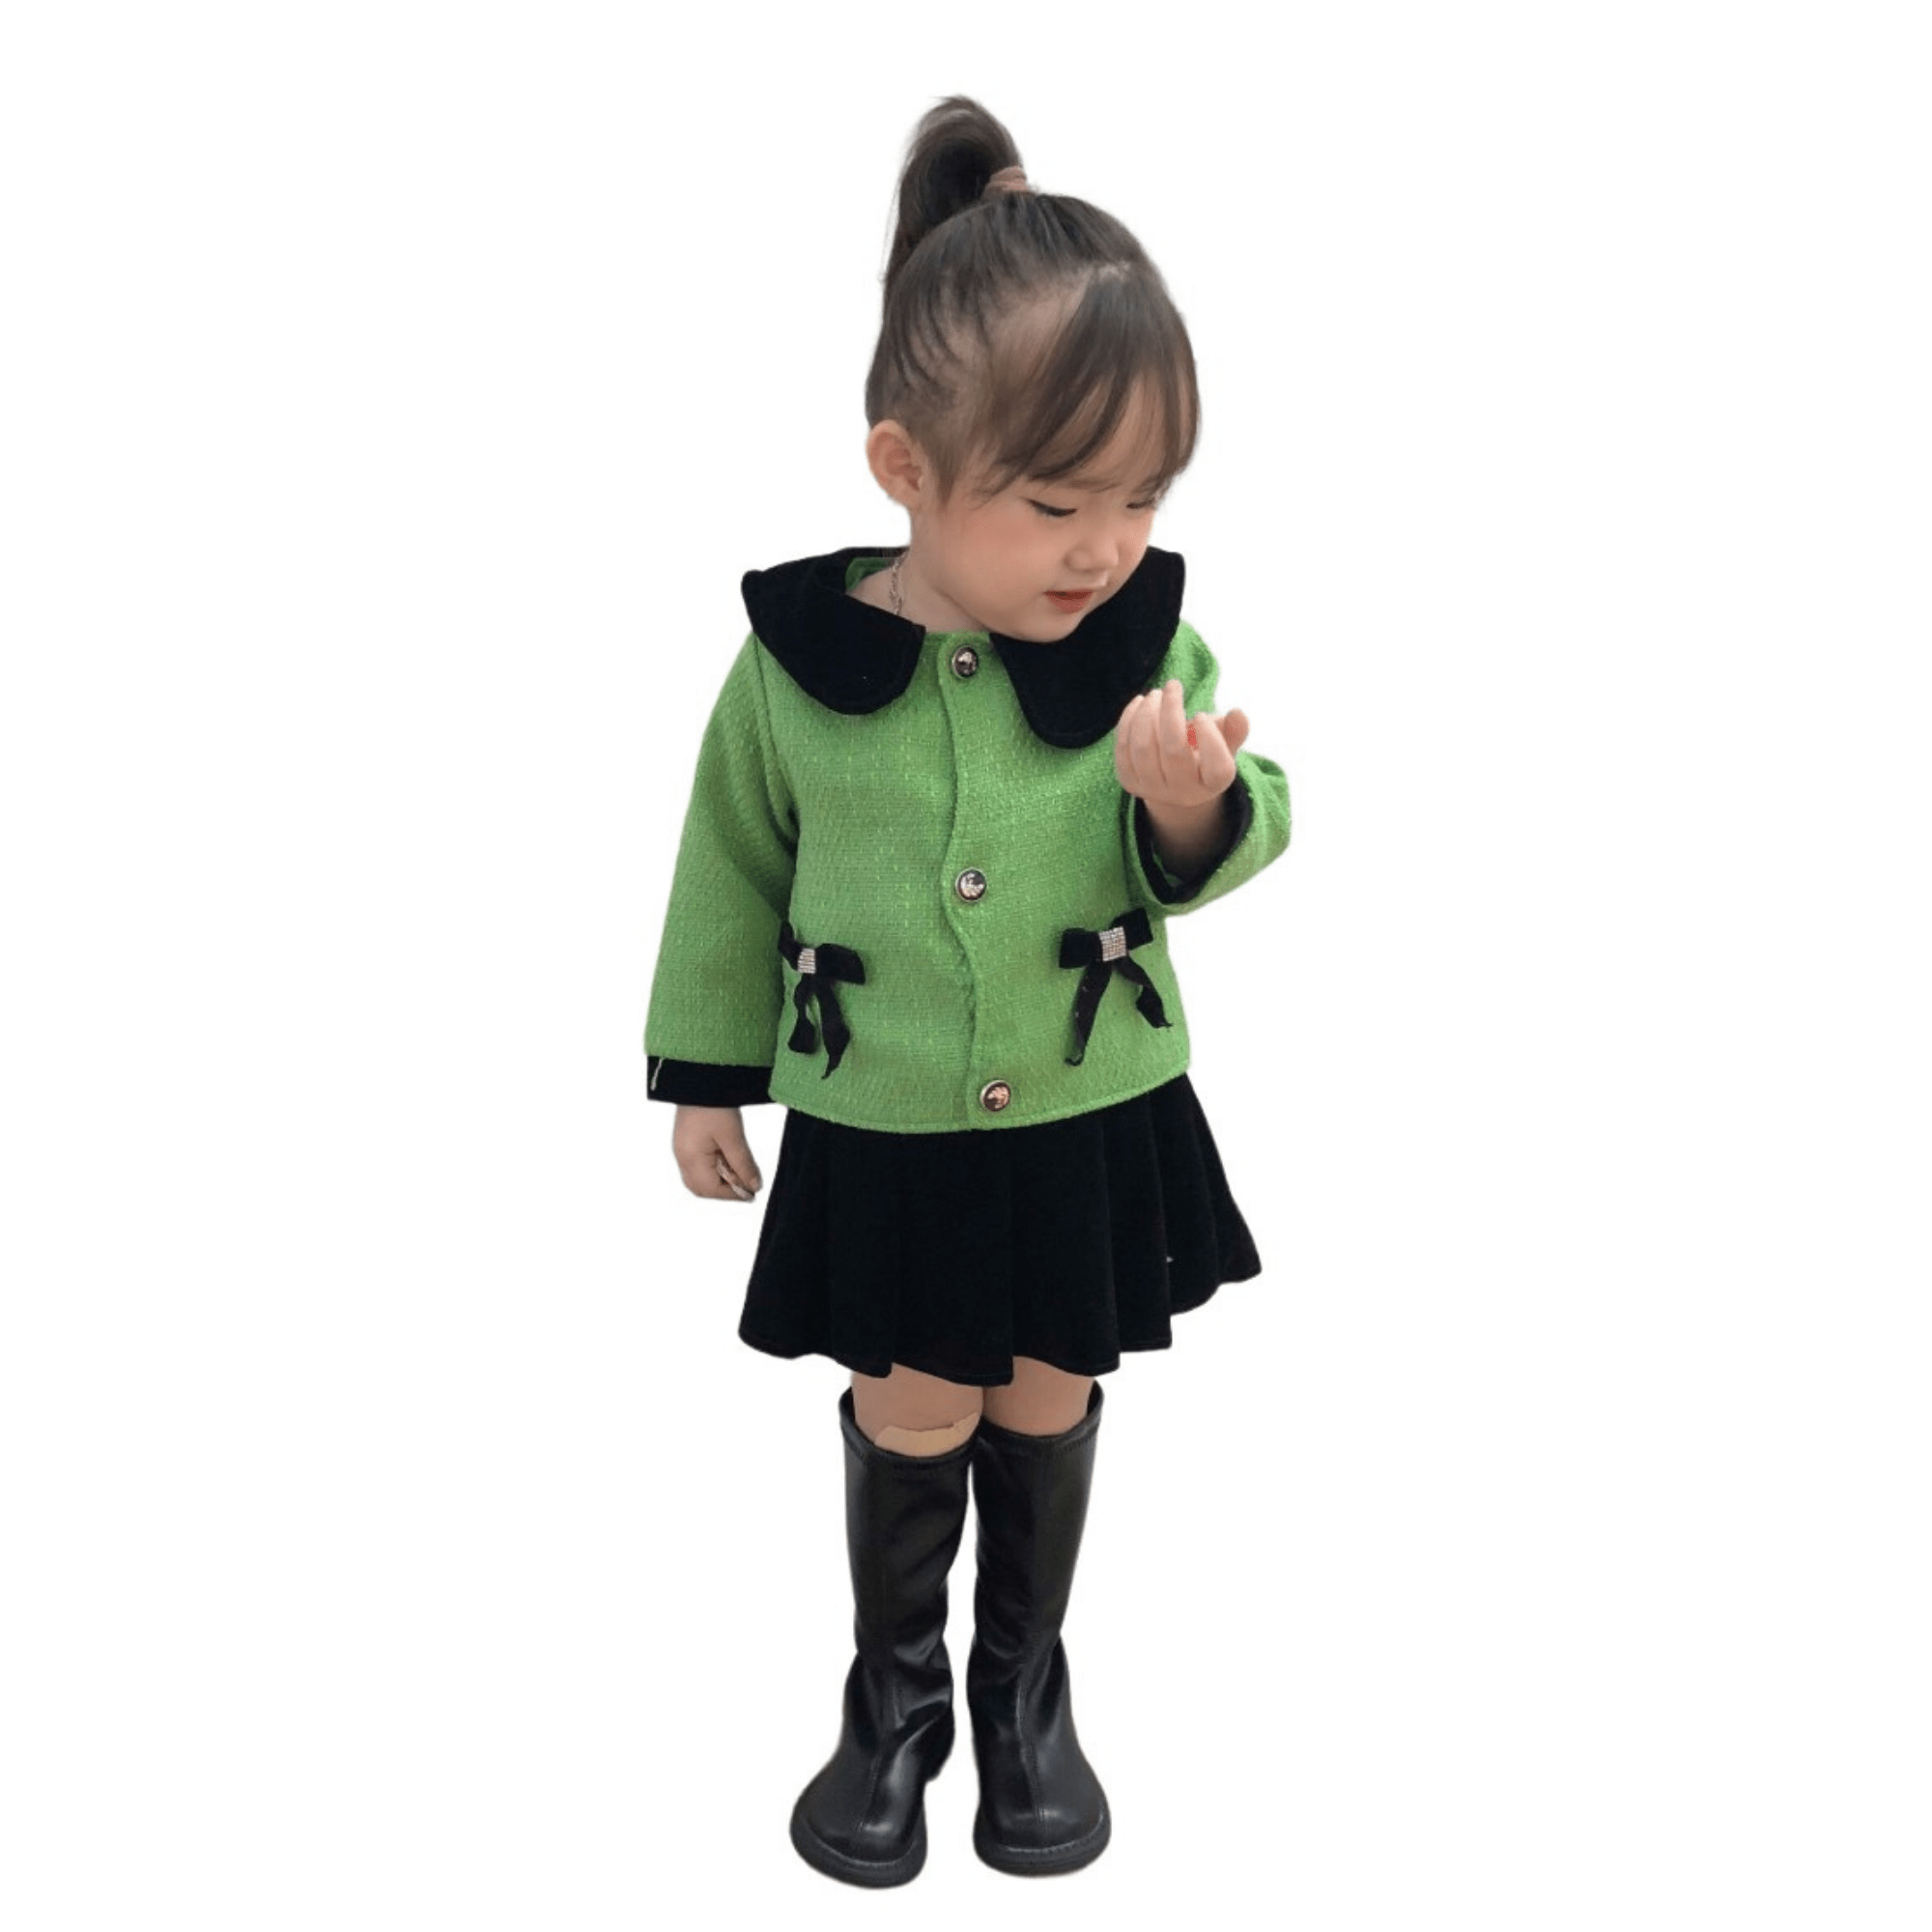 Kids Designers Clothes Comfortable 100% Wool Dresses New Fashion Each One In Opp Bag From Vietnam Manufacturer